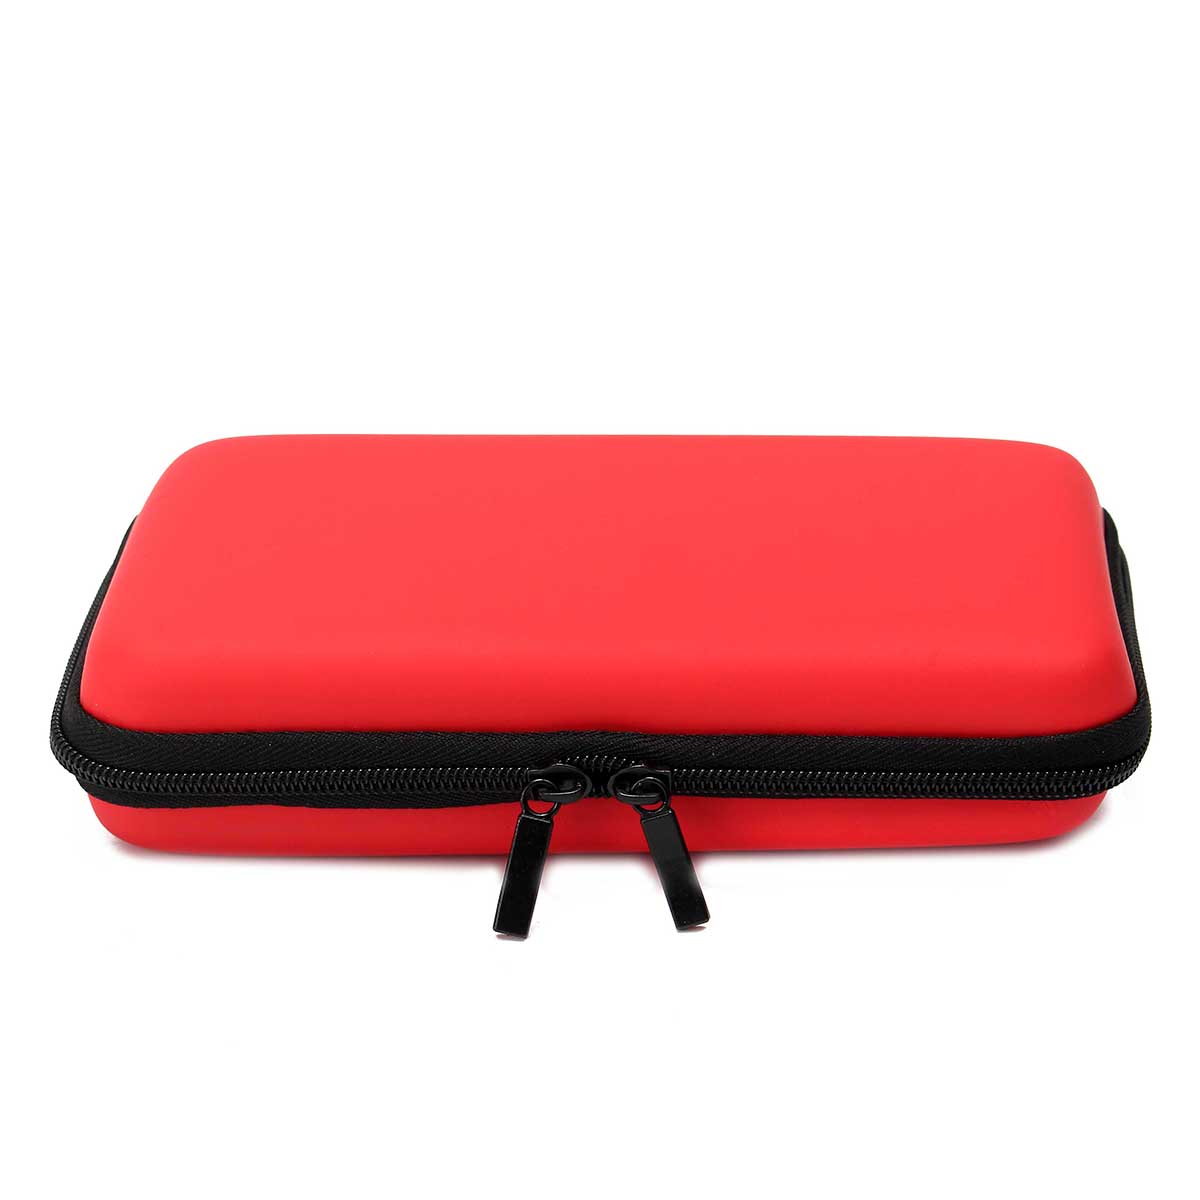 EVA Hard Protective Carrying Case Cover Handle Bag For Nintendo New 2DS LL/XL 43